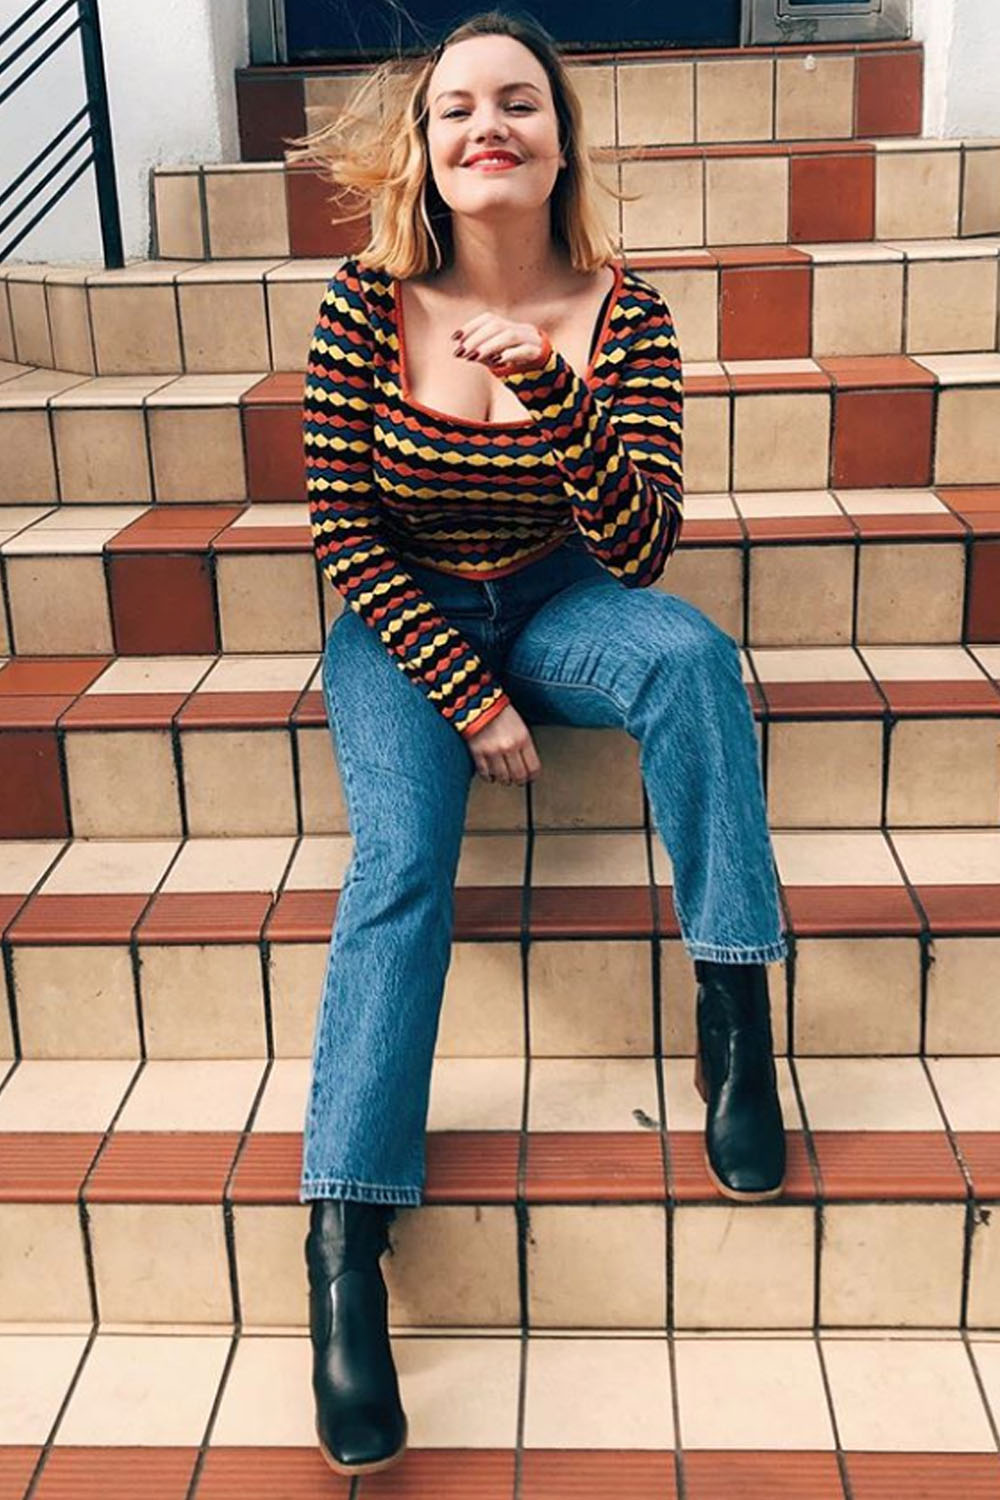 shopping for girls with large busts: ASOS Lotte wearing a striped top